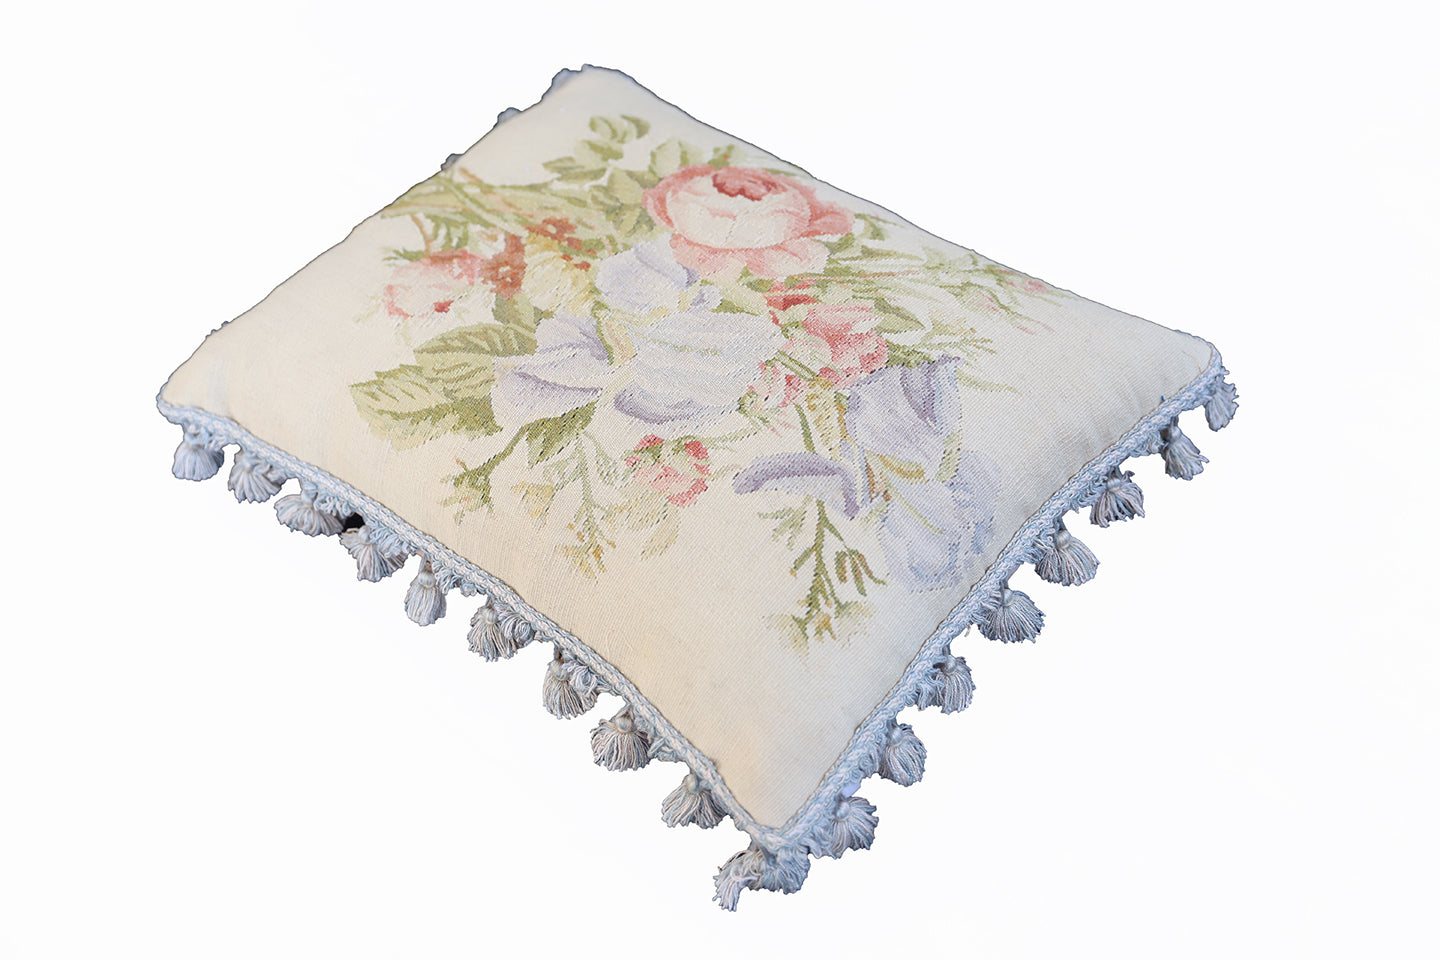 18"x22" Cream and Pink Floral Aubusson Decor Pillow Case